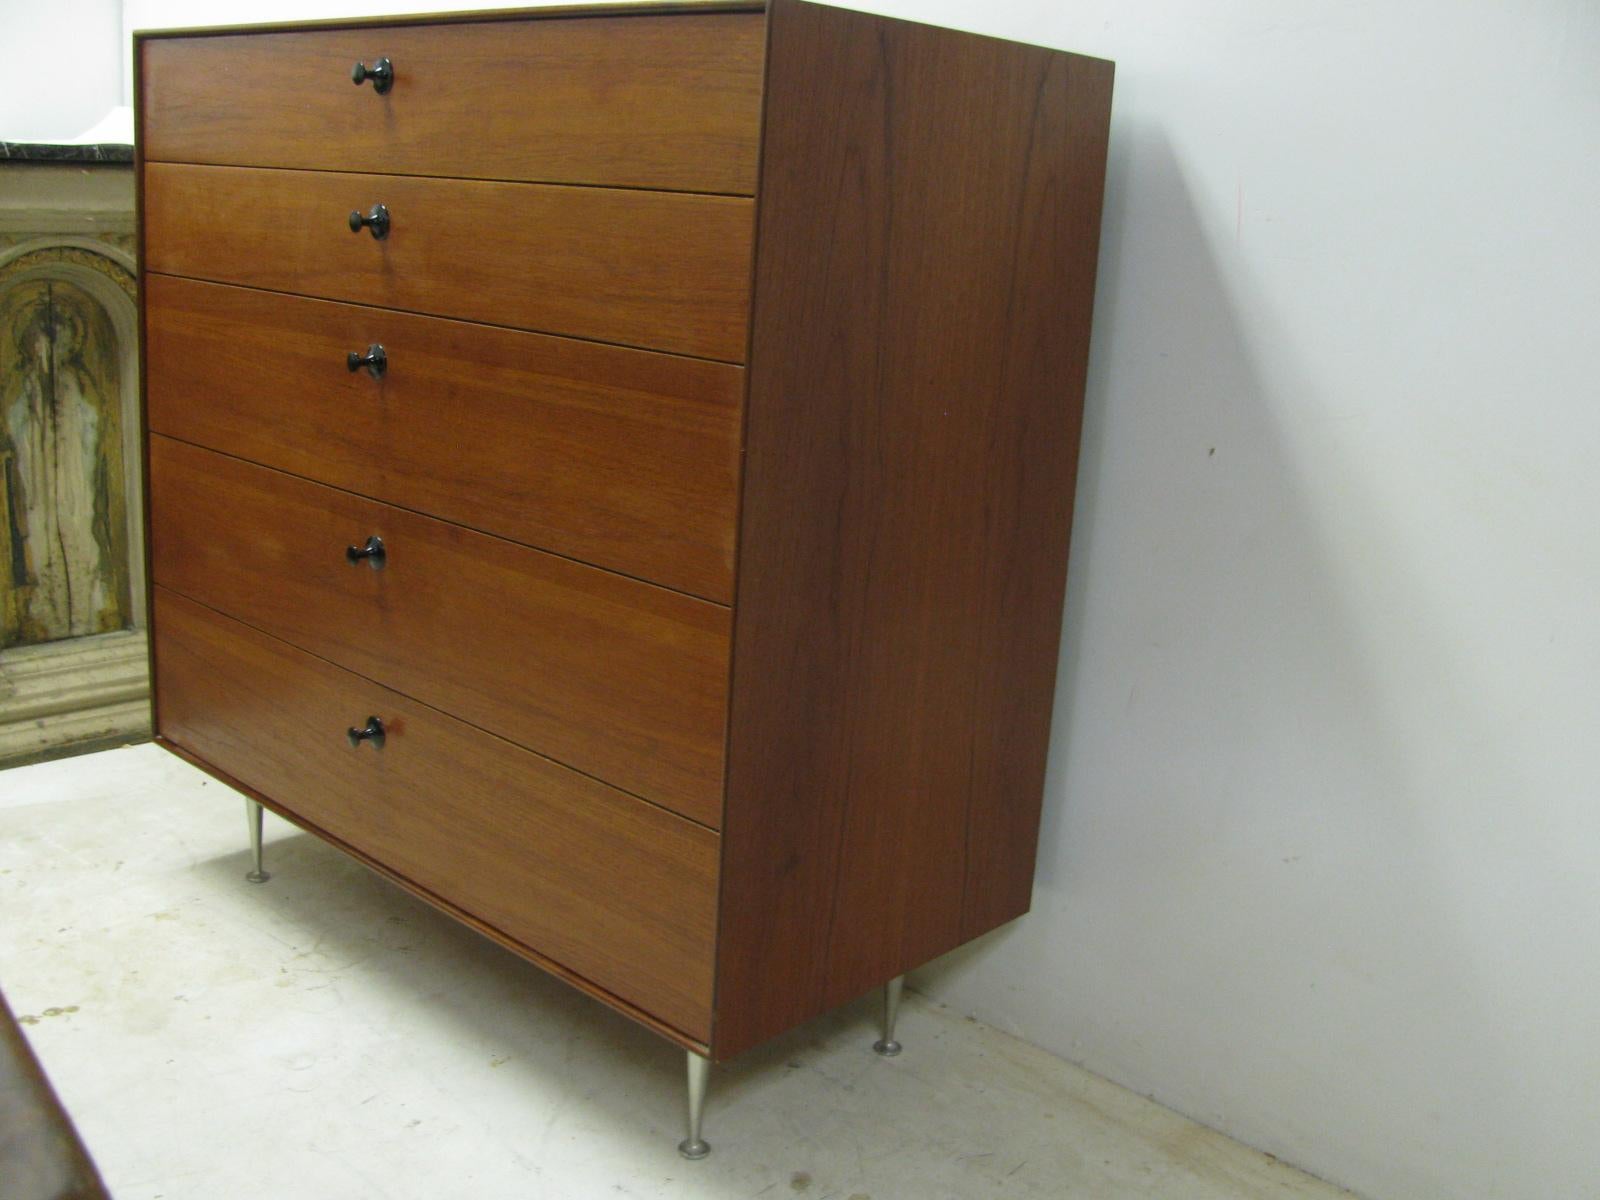 Beautiful design by George Nelson for Herman Miller. Five-drawer teak chest on aluminium legs with black enameled pulls. Has drawer separate compartment dividers which can be taken out. In excellent vintage condition with minimal wear.